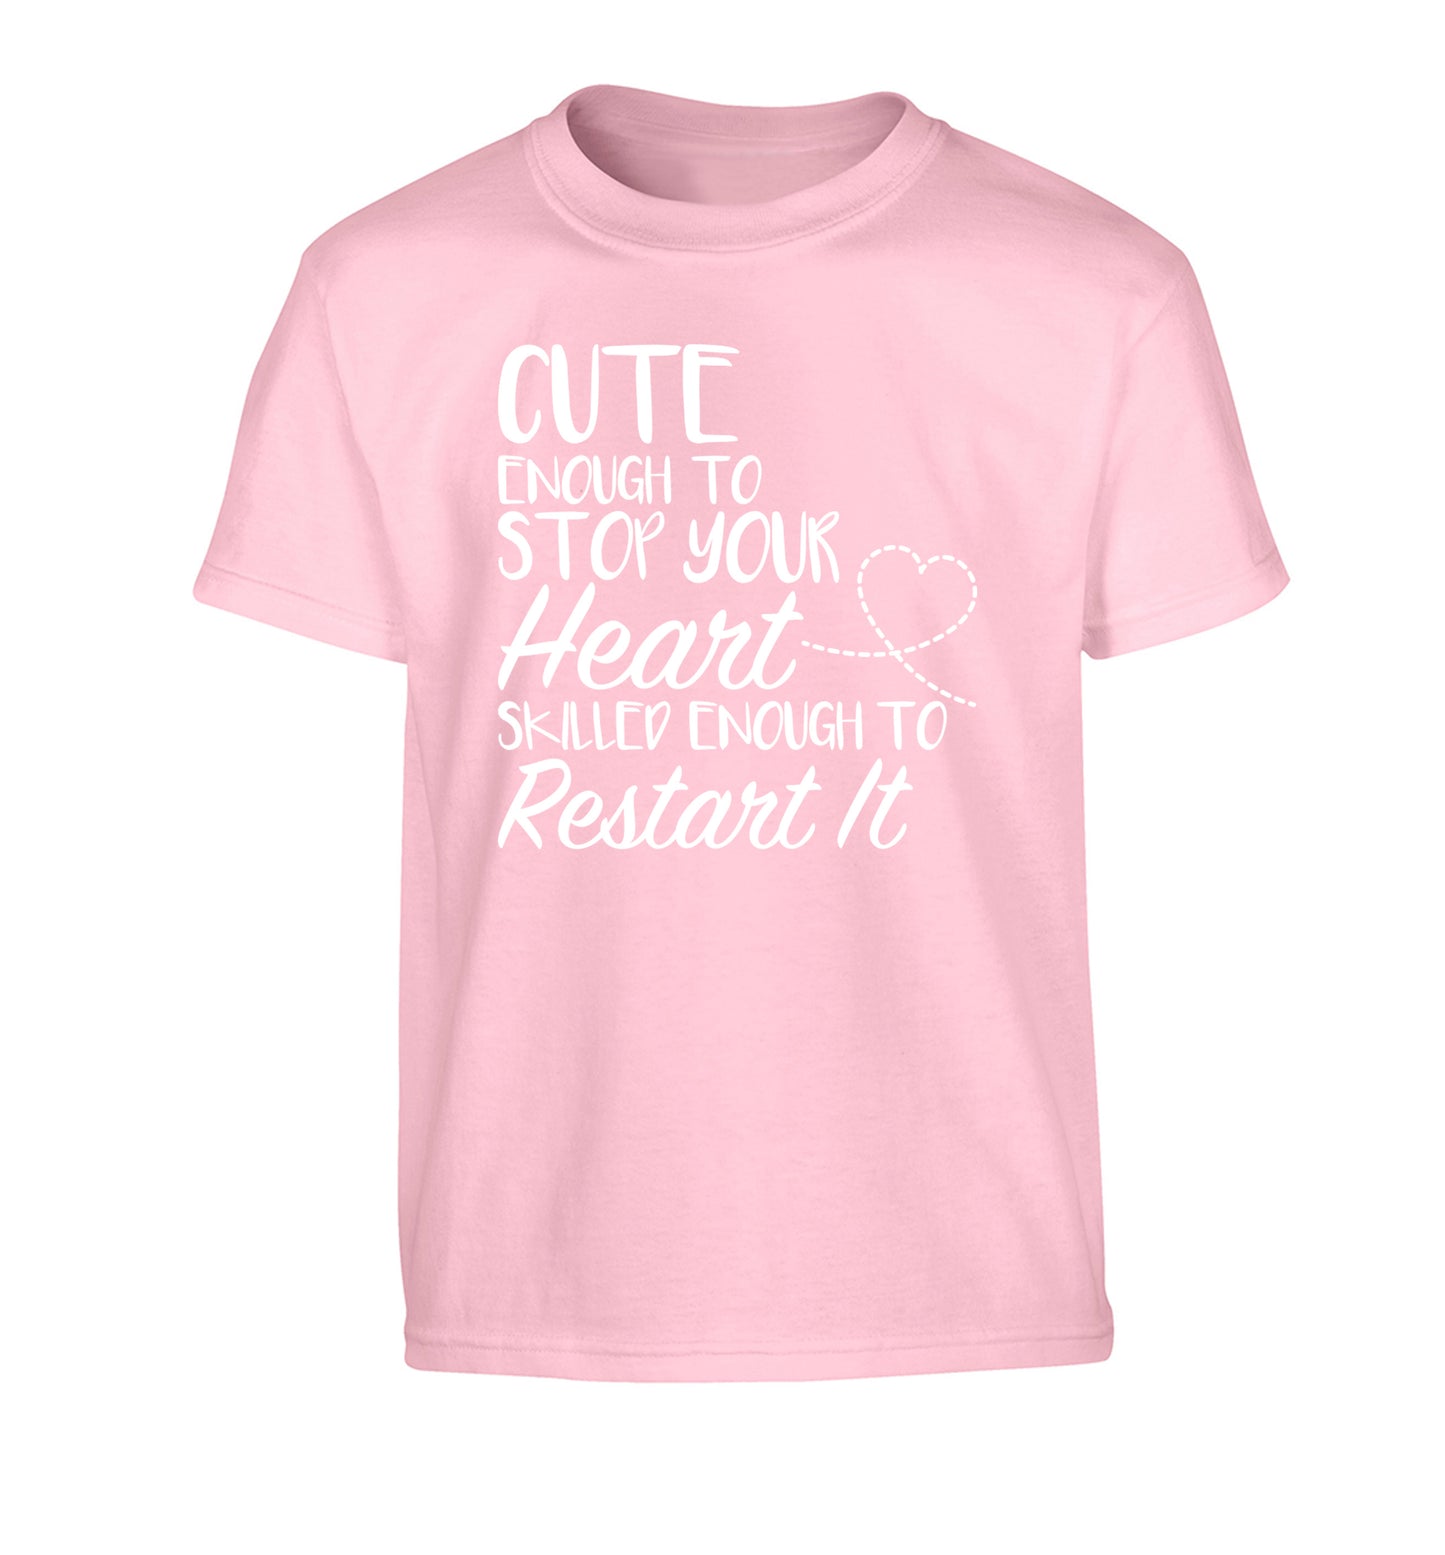 Cute enough to stop your heart skilled enough to restart it Children's light pink Tshirt 12-13 Years